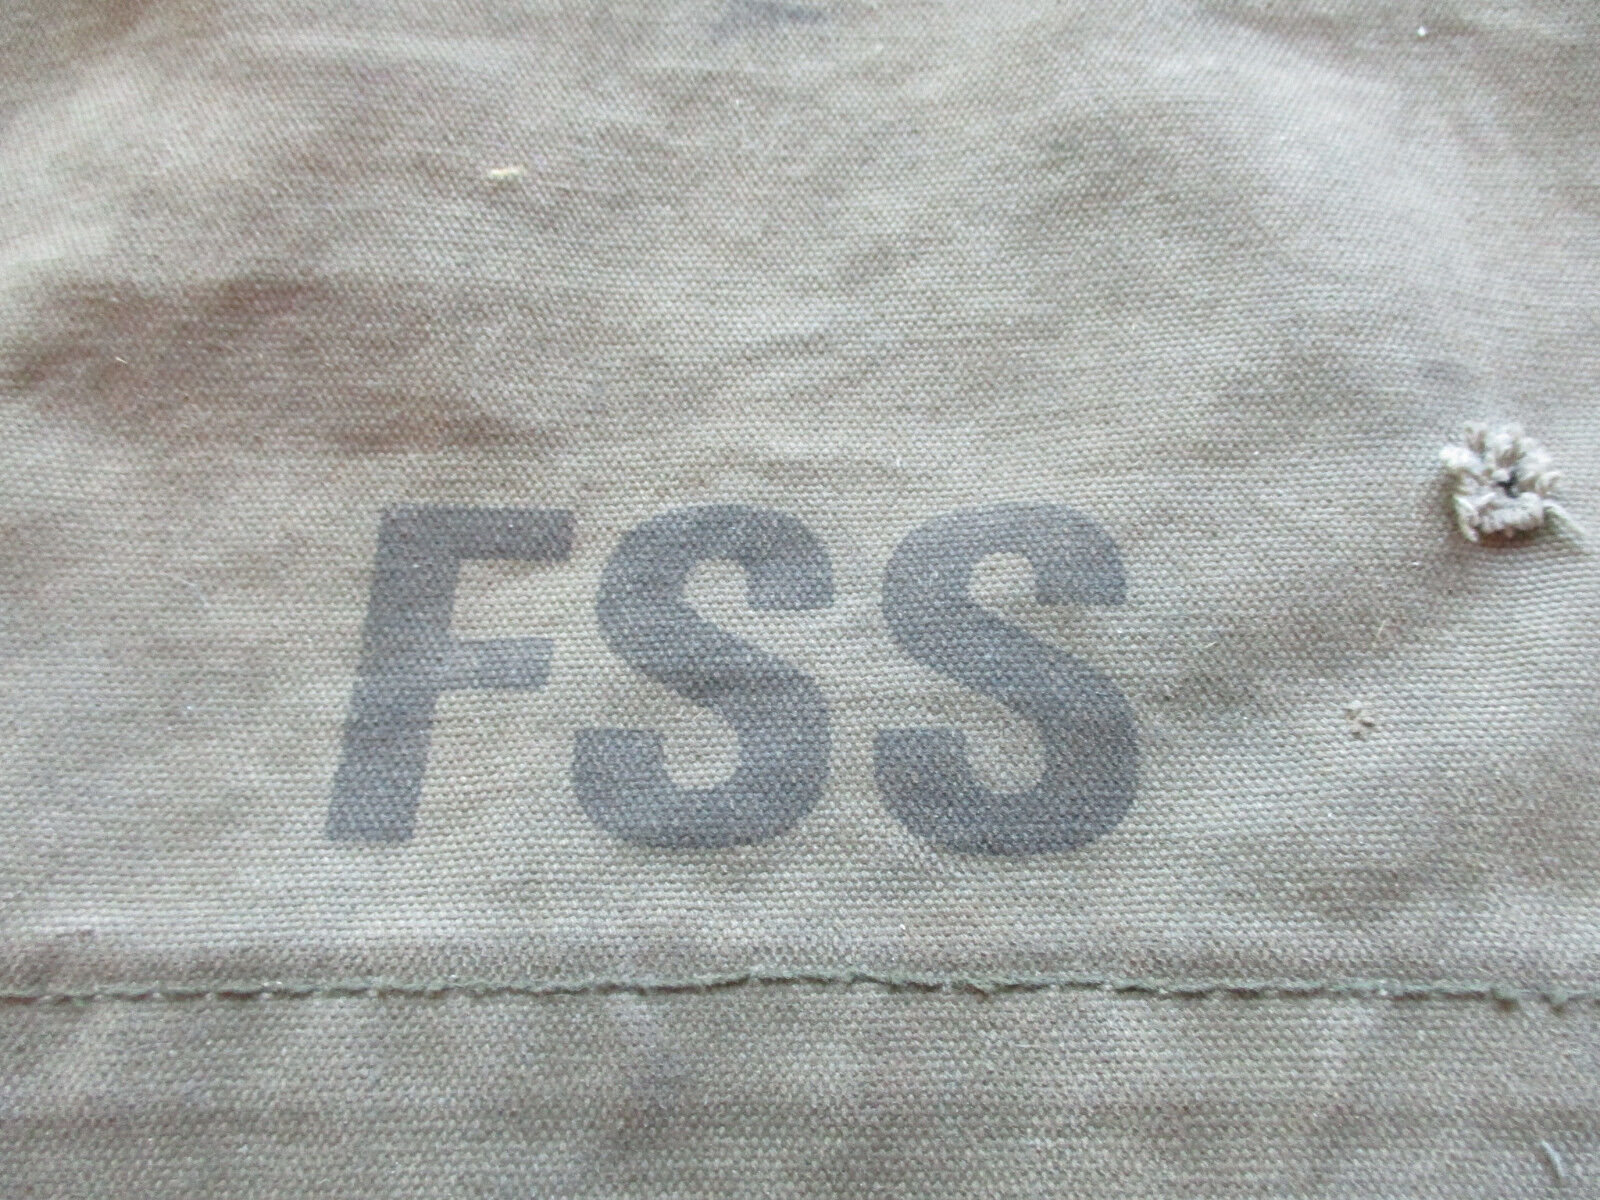 Vintage Green Fss Usfs Forest Service Canvas Packsack Field Bag Backpack (1964)